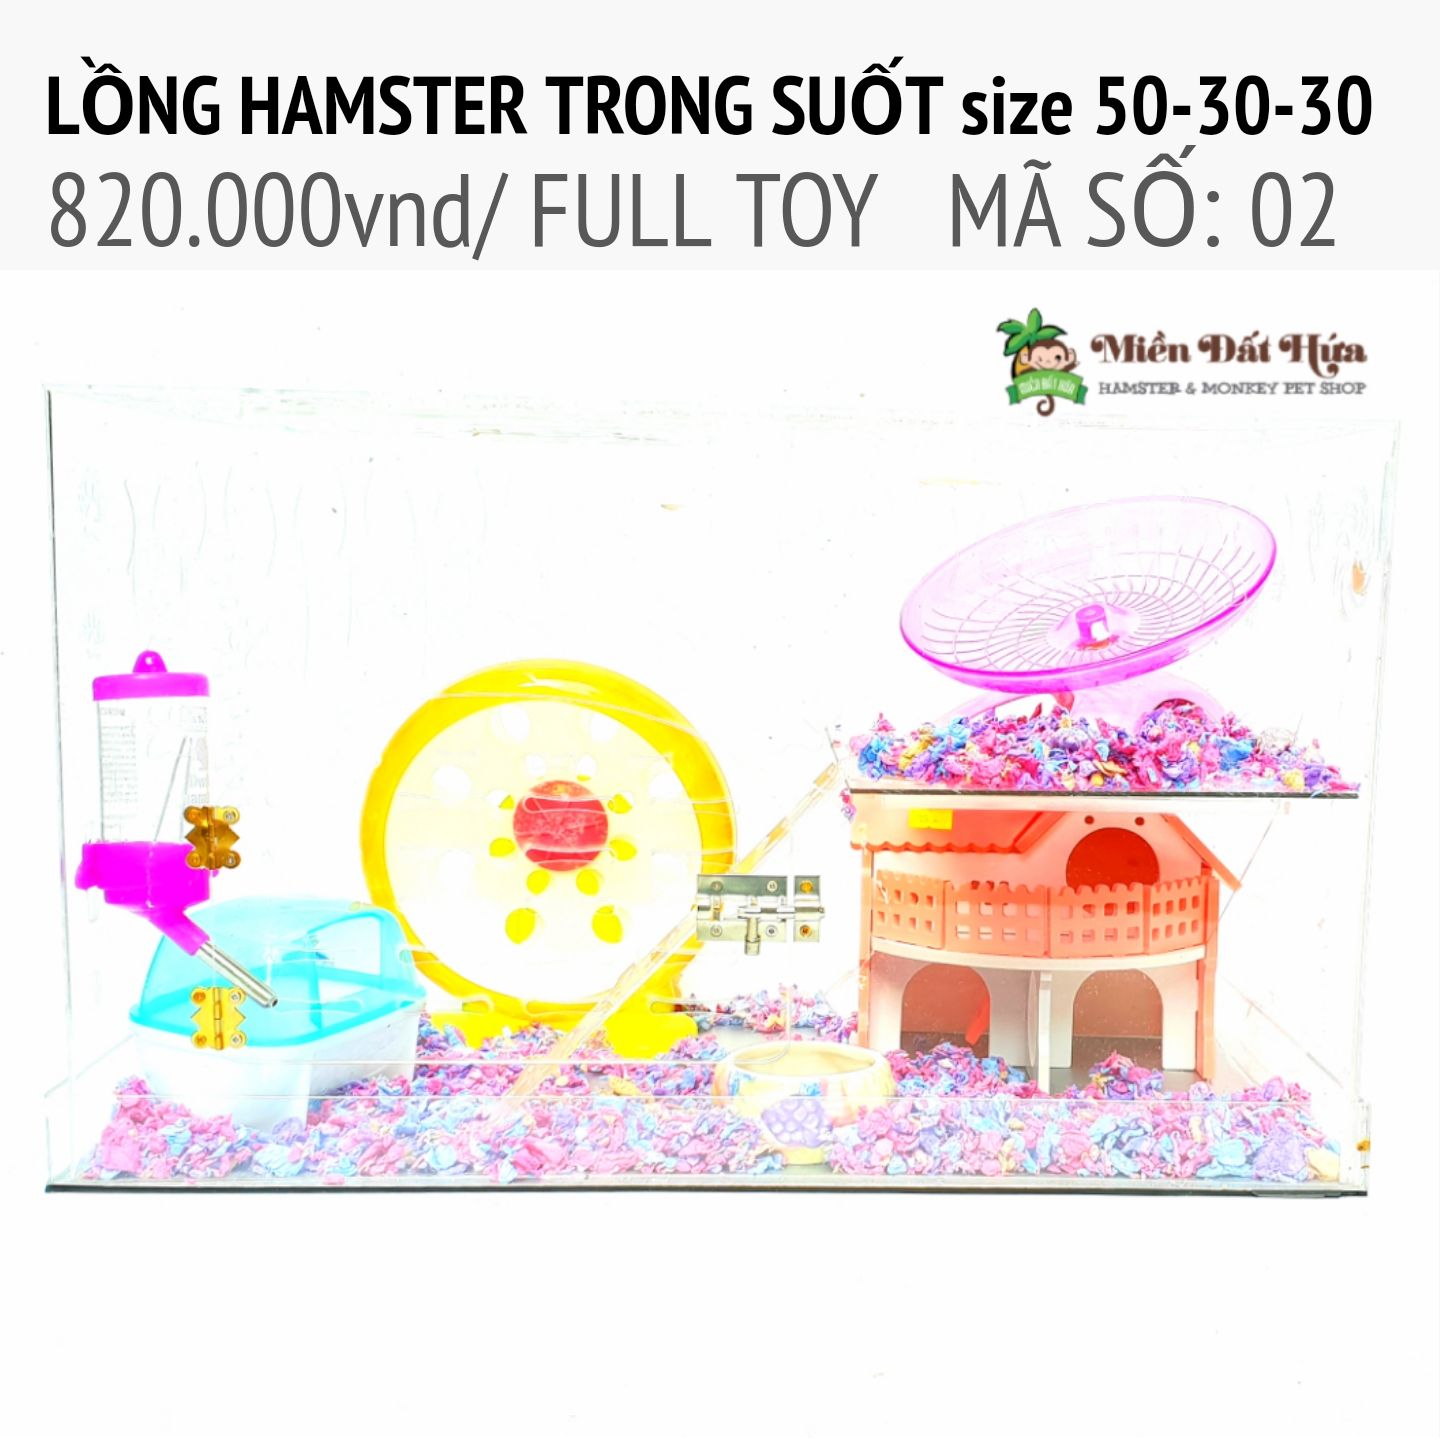 LỒNG hamster trong suốt size 50-30-30 ms02